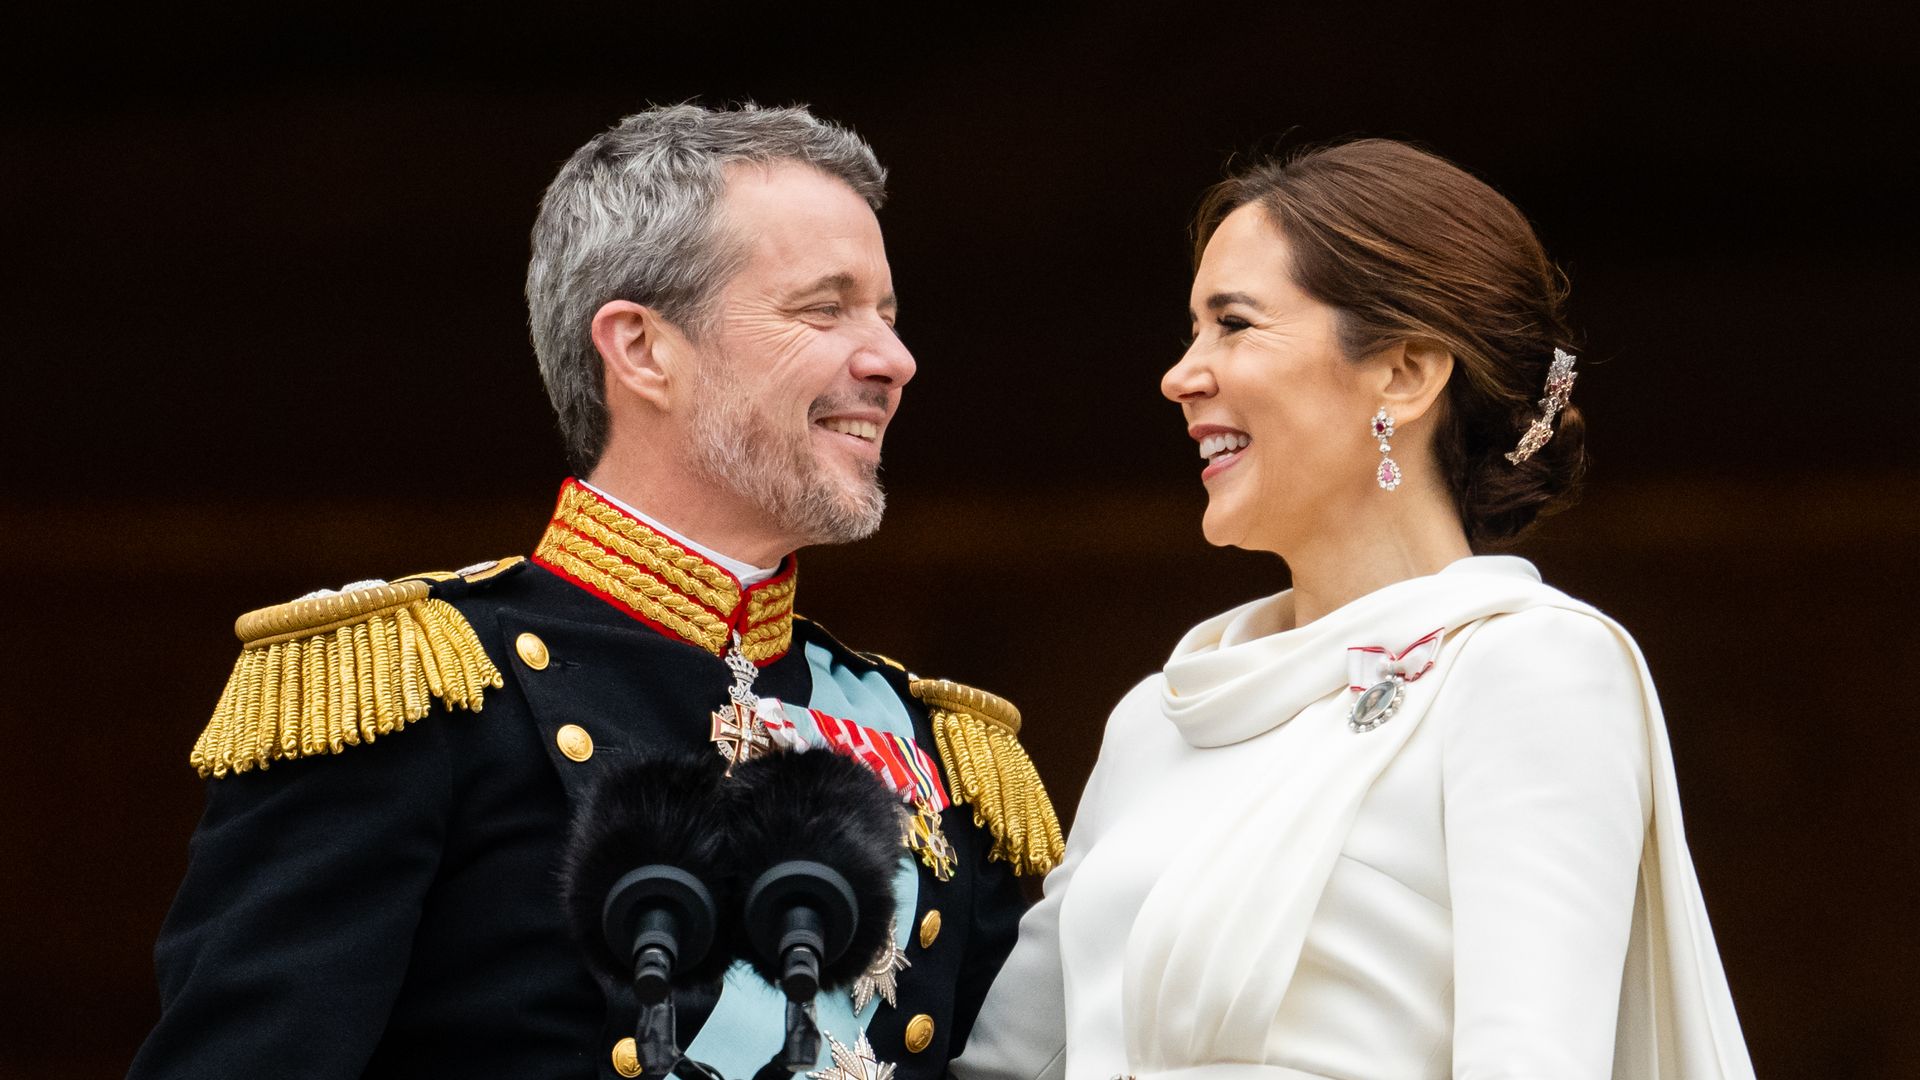 King Frederik smiles at Queen Mary after proclaimation